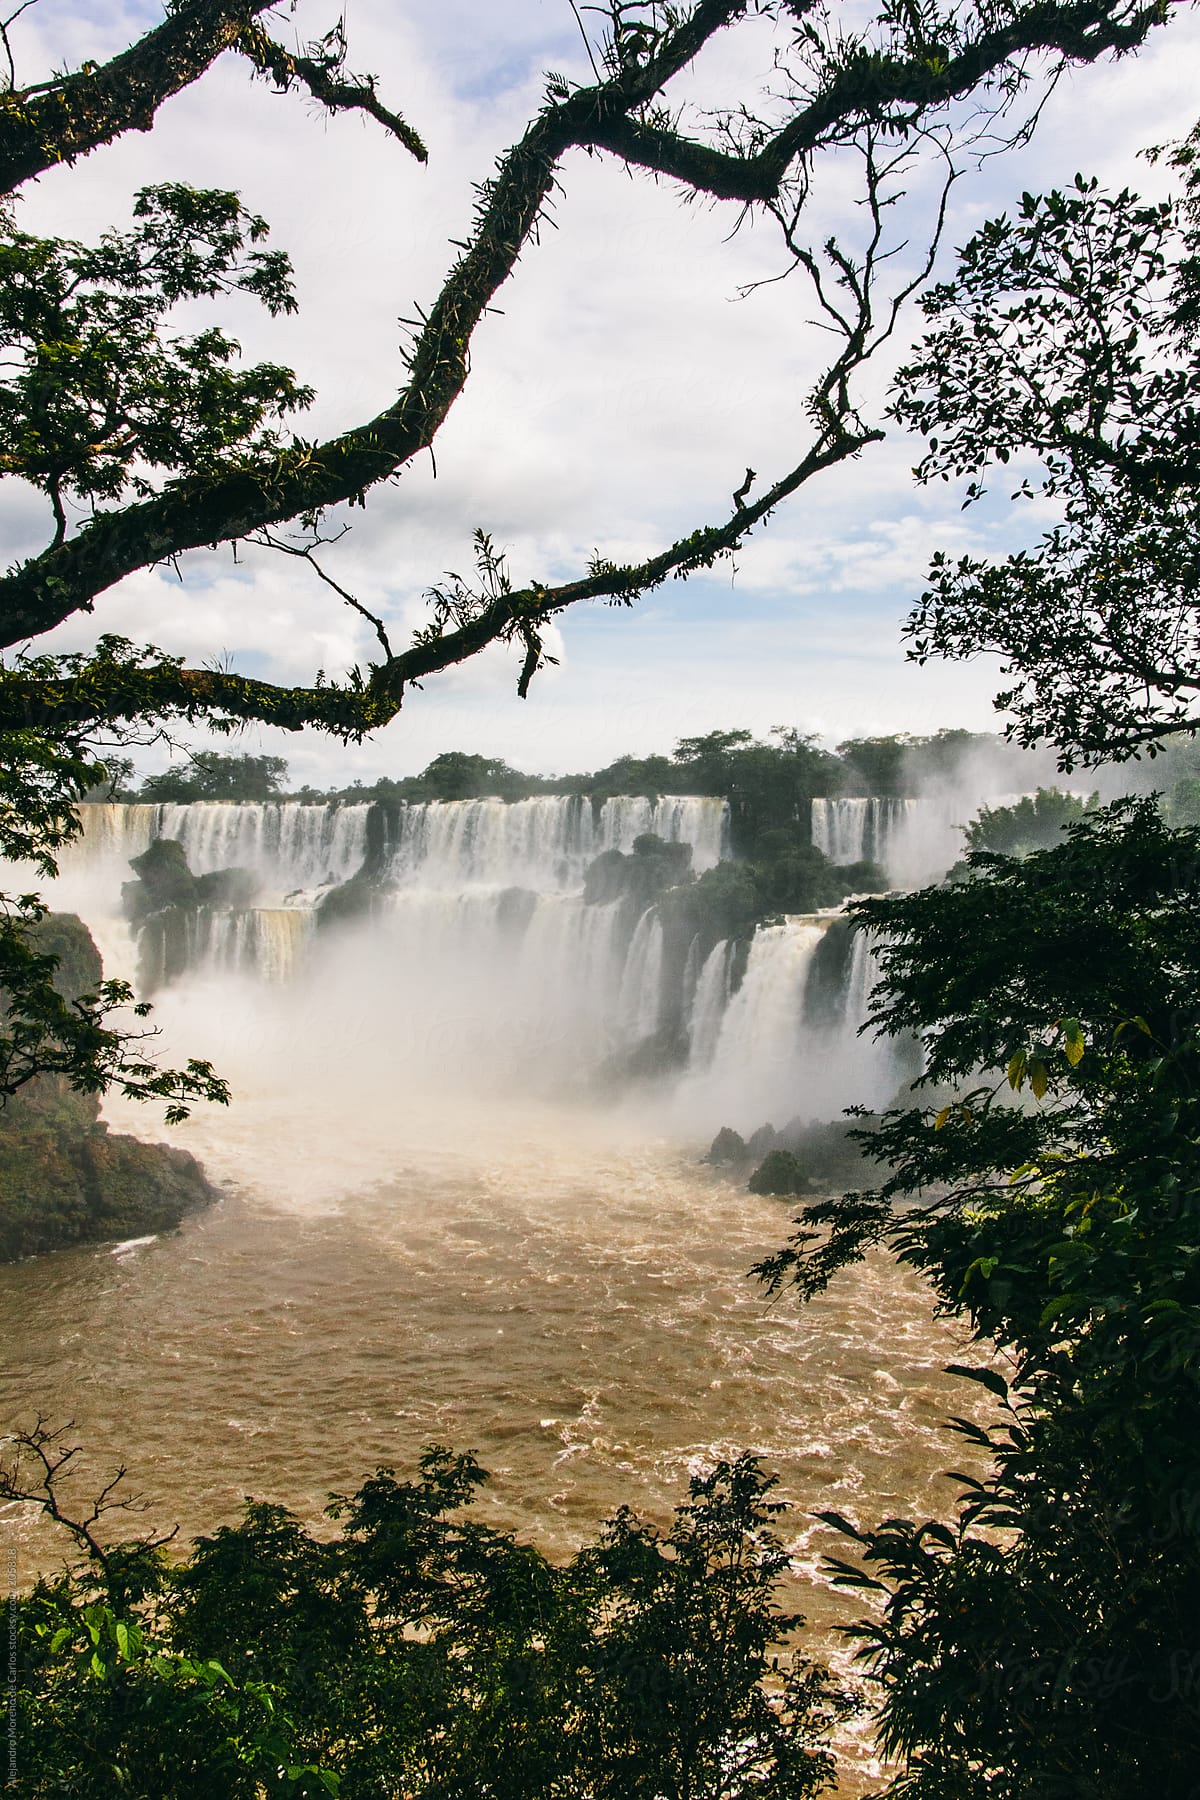 Waterfalls in the jungle with branches on foreground - Iguassu falls, Brazil / Argentina